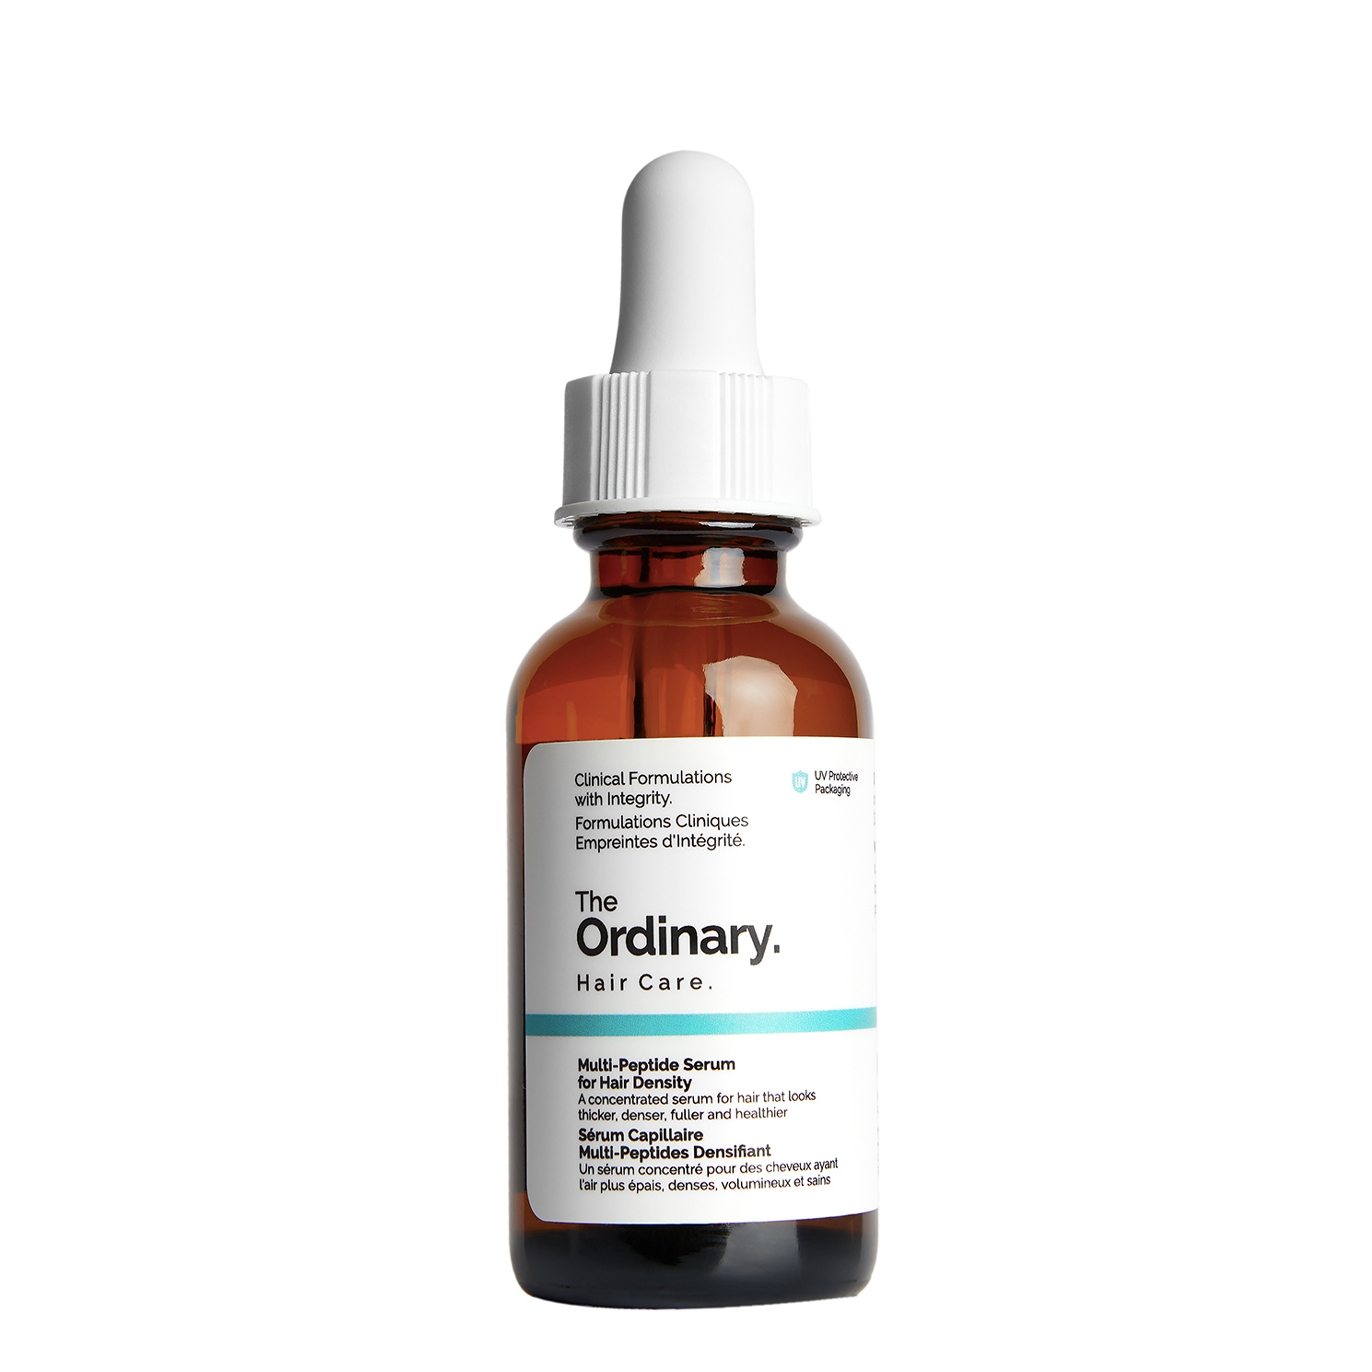 THE ORDINARY THE ORDINARY MULTI-PEPTIDE SERUM FOR HAIR DENSITY